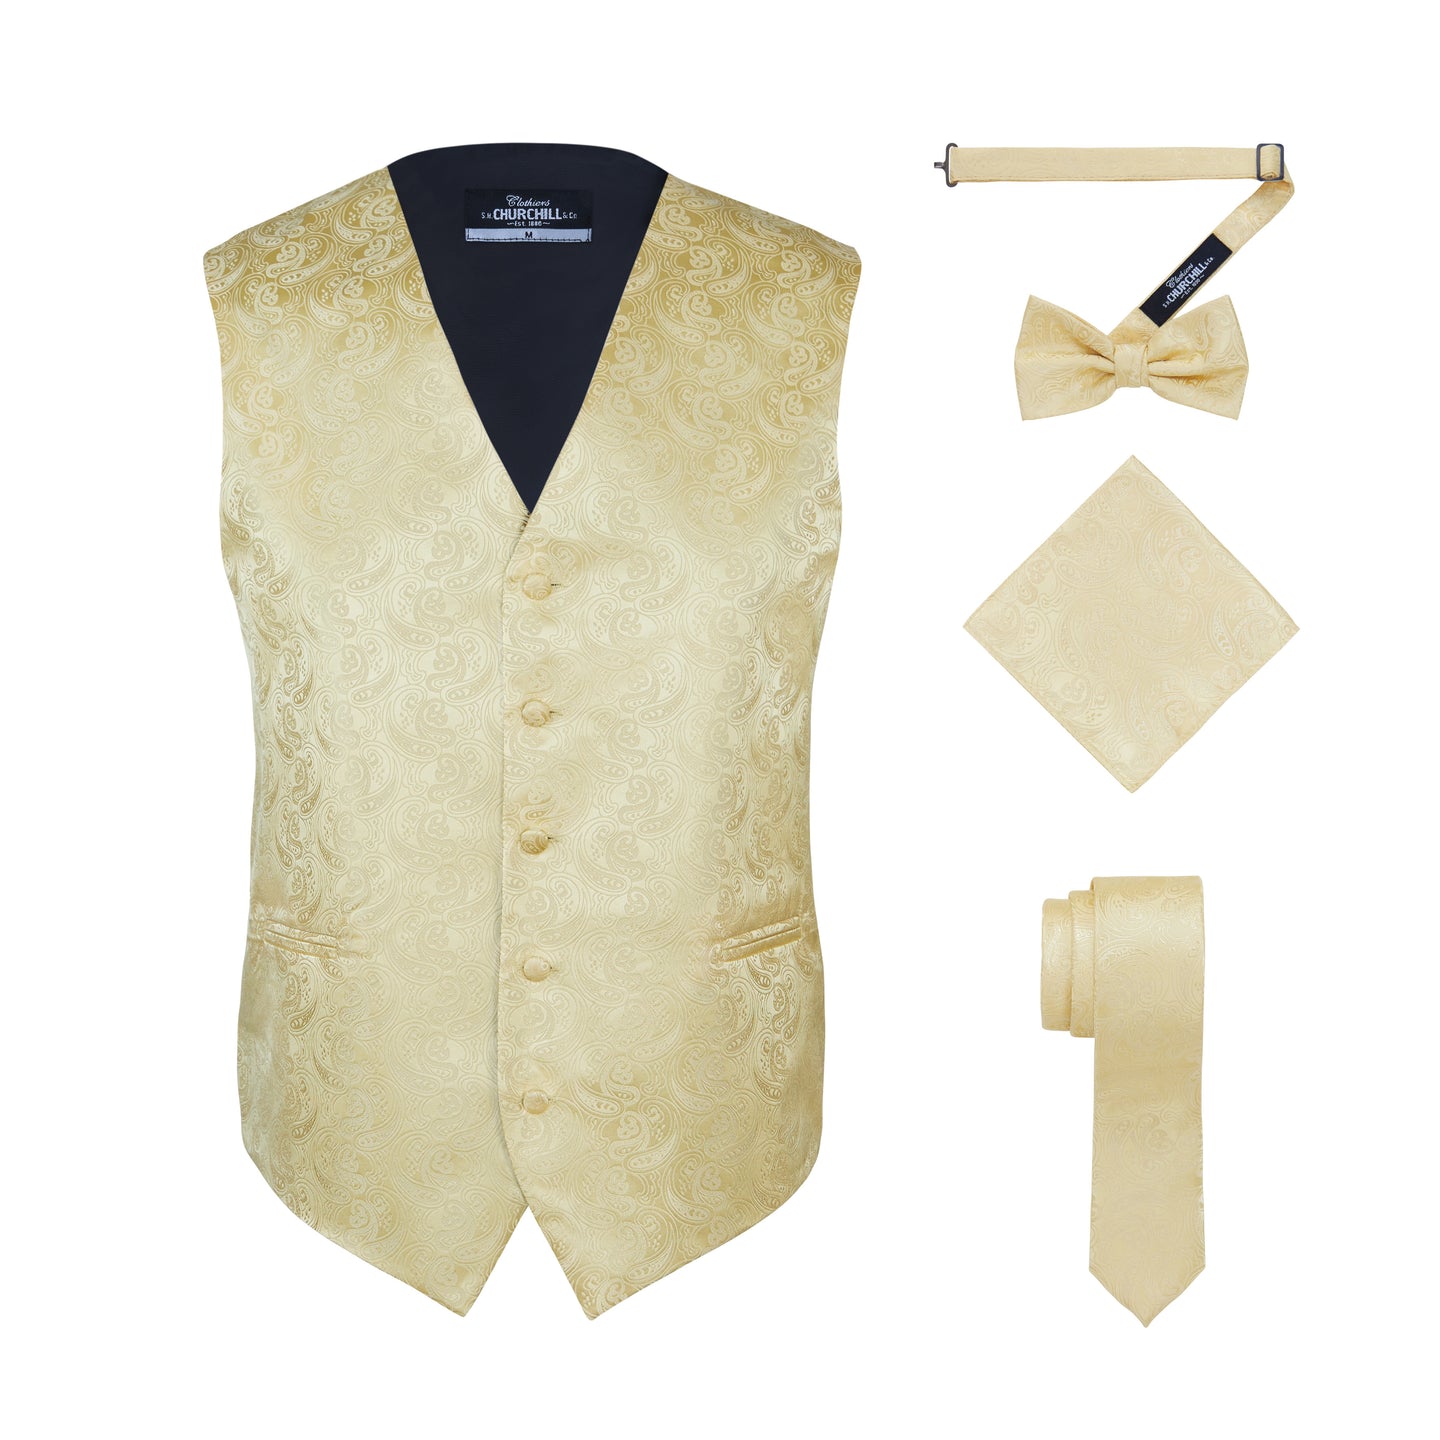 S.H. Churchill & Co. Men's Gold Paisley Vest Set, with Bow Tie, Neck Tie and Pocket Hanky